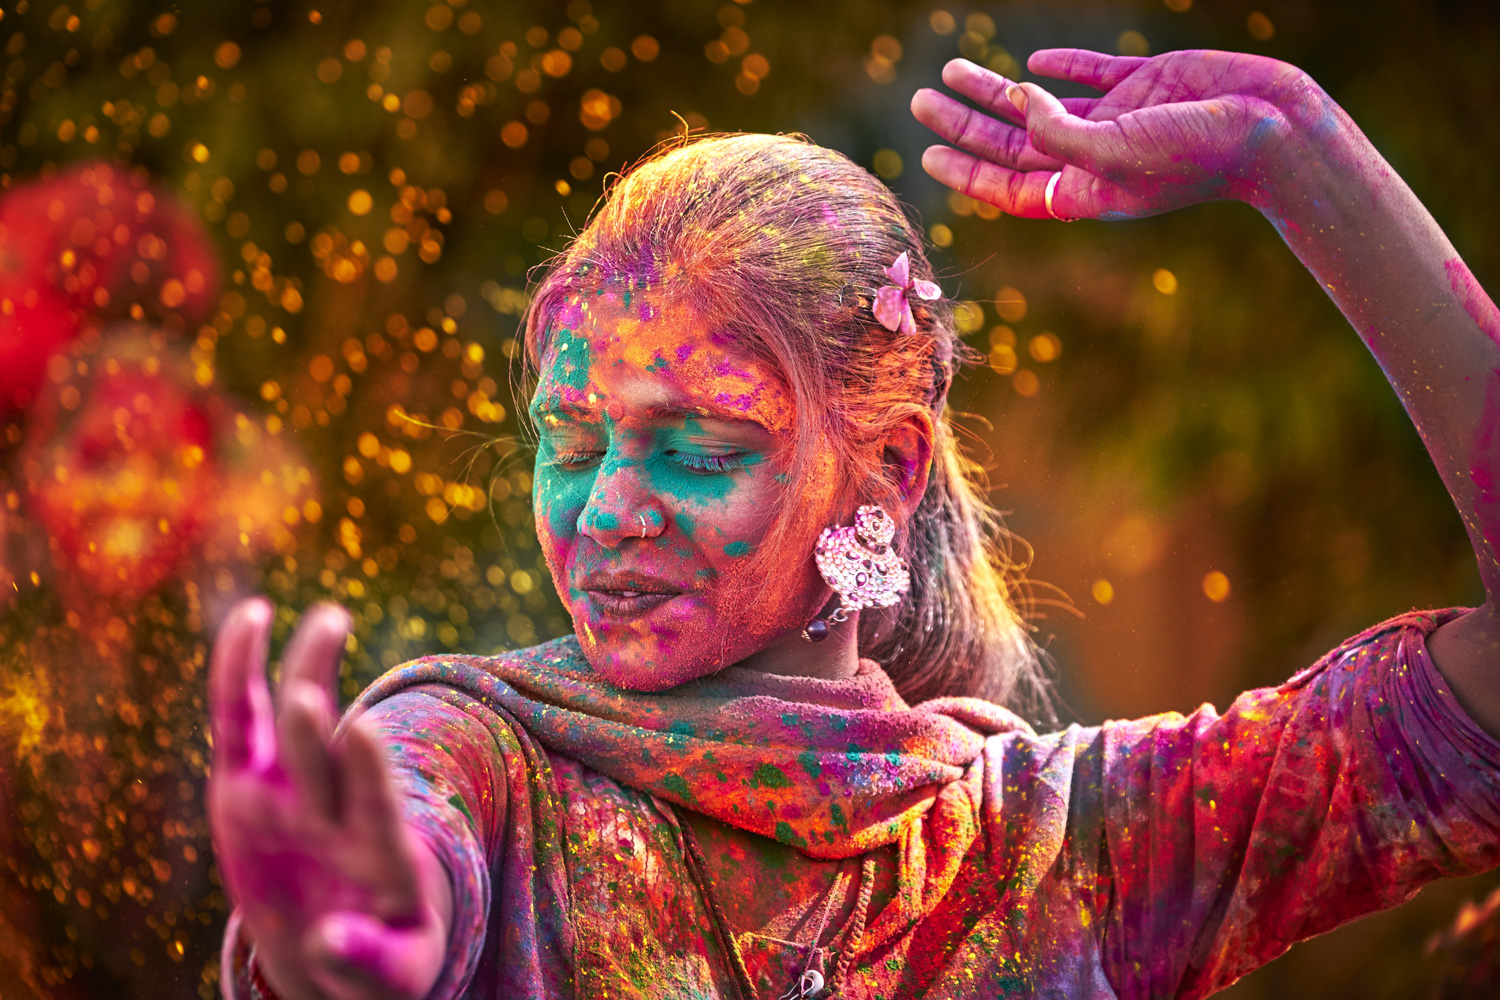 Are You Away from Your Family And Friends on This Holi Festival And Want To Send Holi Gifts To Them?